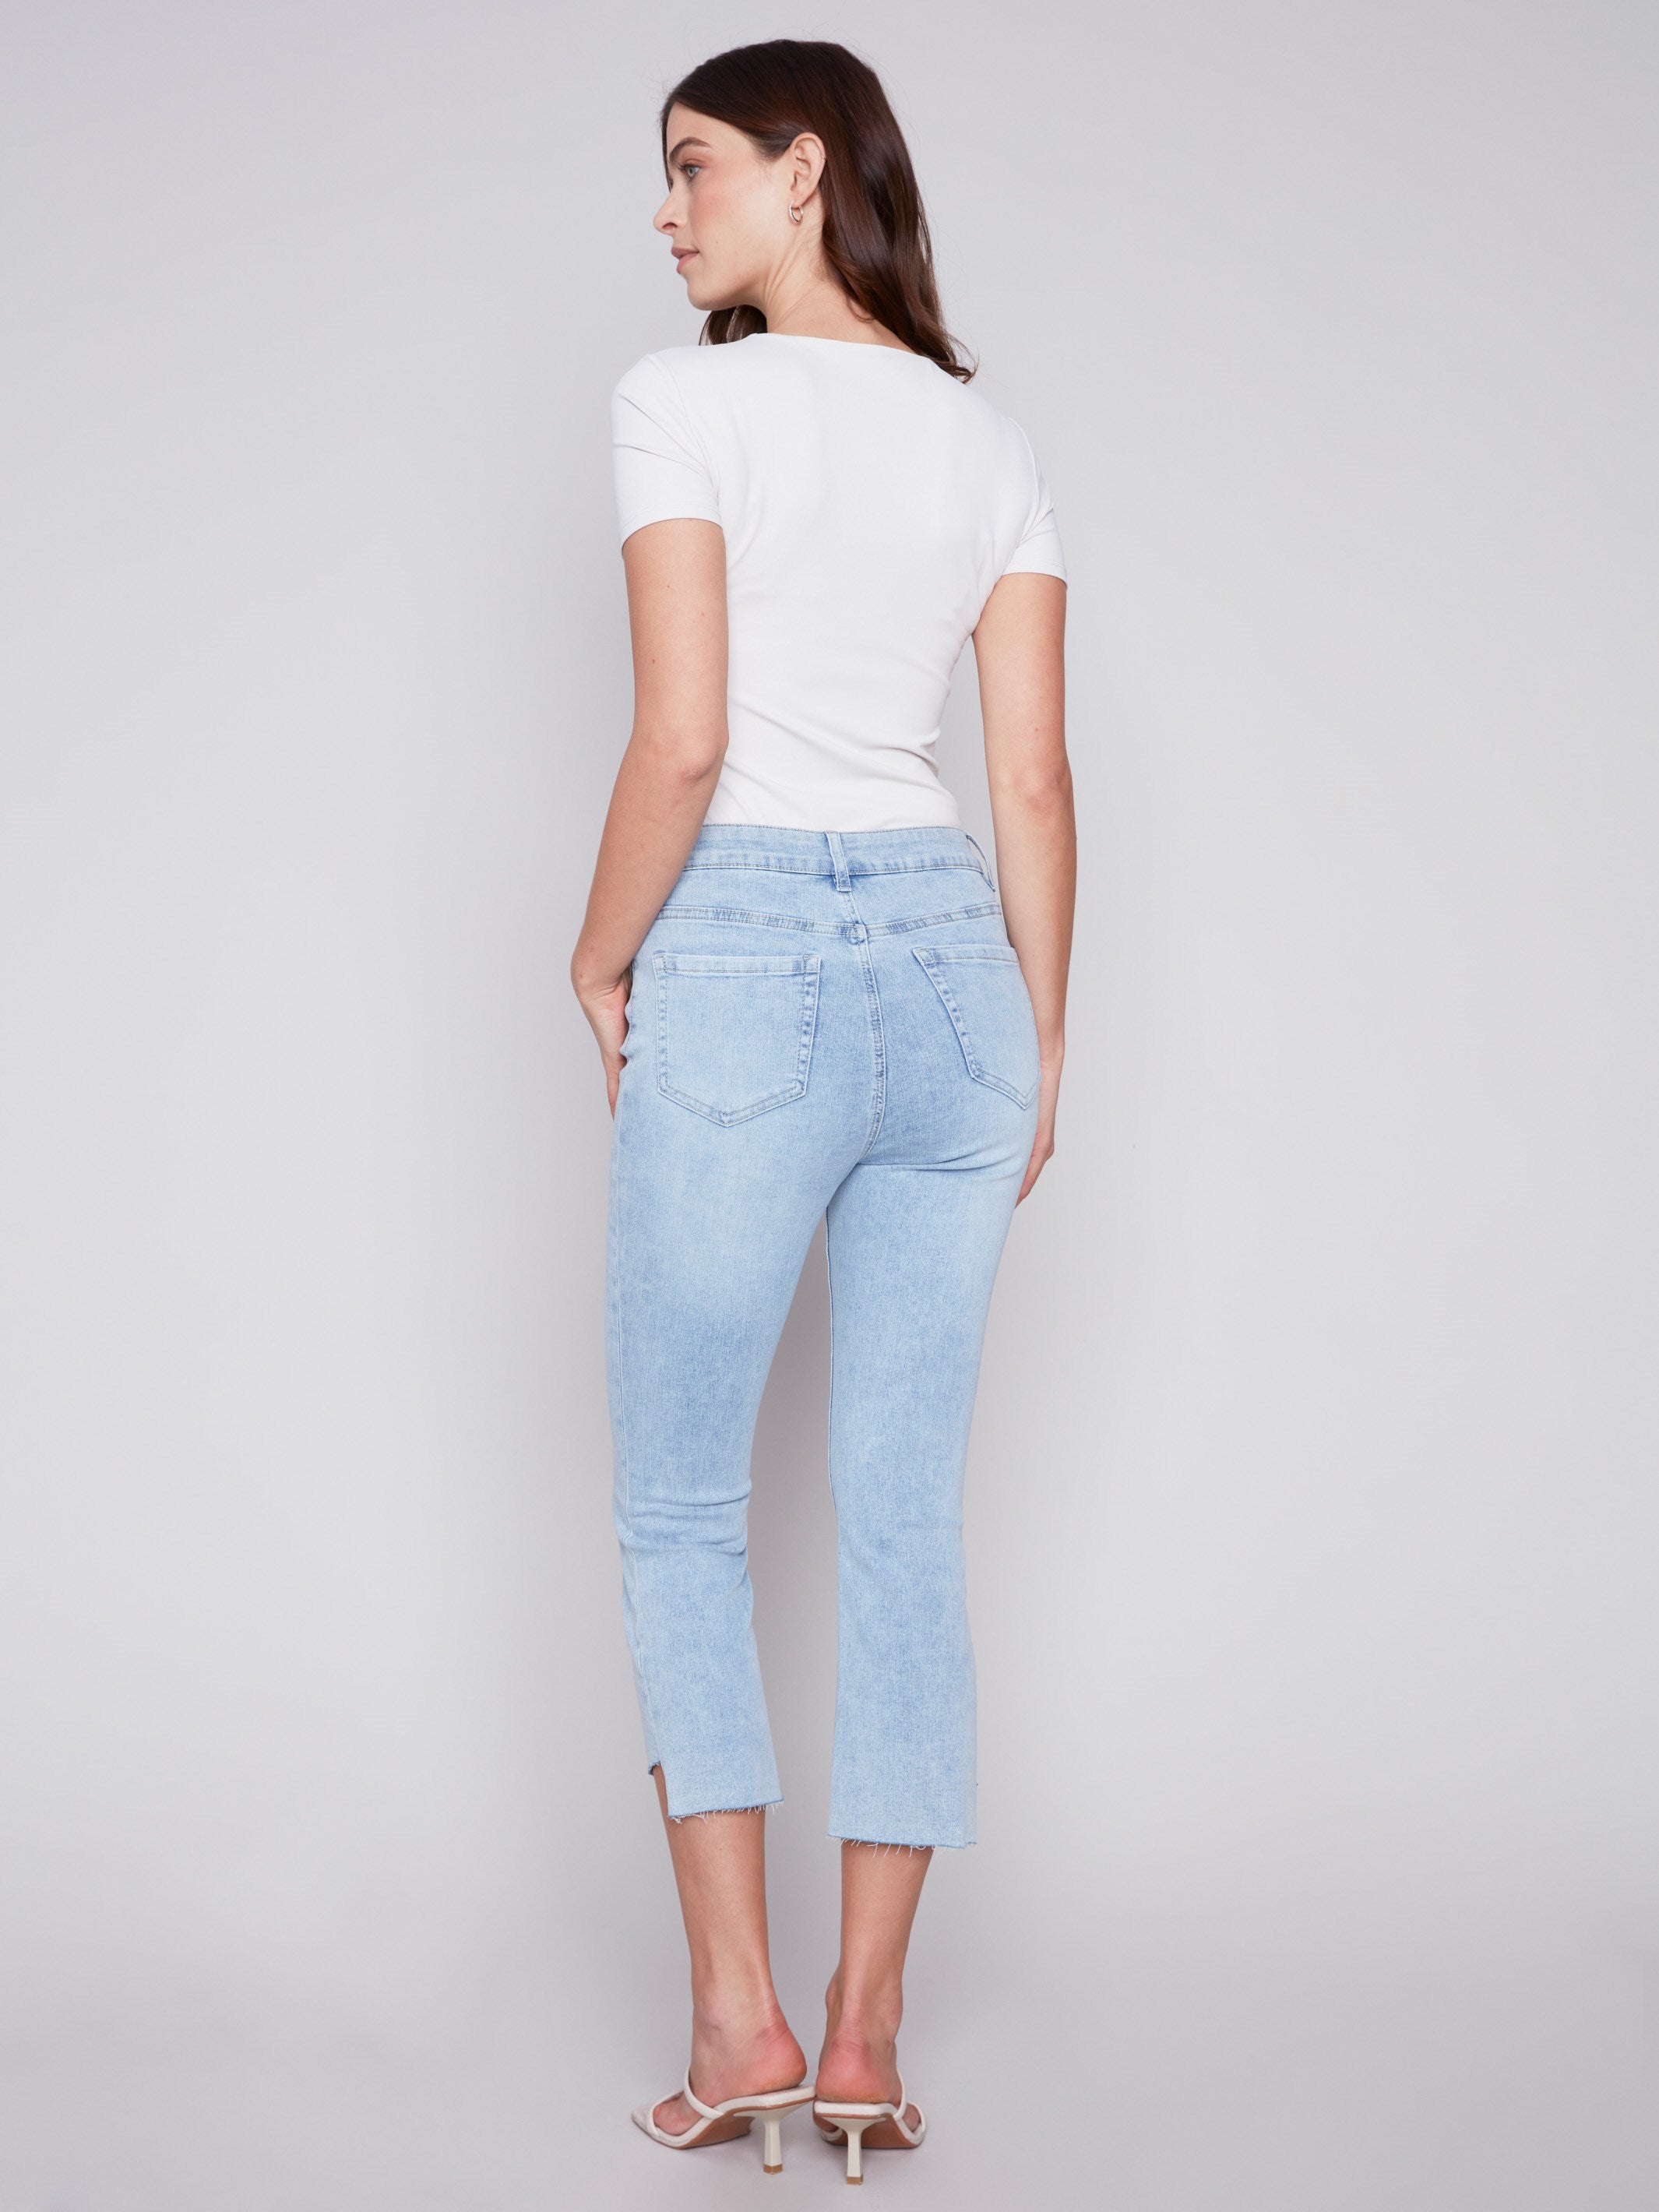 Cropped Bootcut Jeans with Asymmetrical Hem - Bleach Blue - Charlie B Collection Canada - Image 6